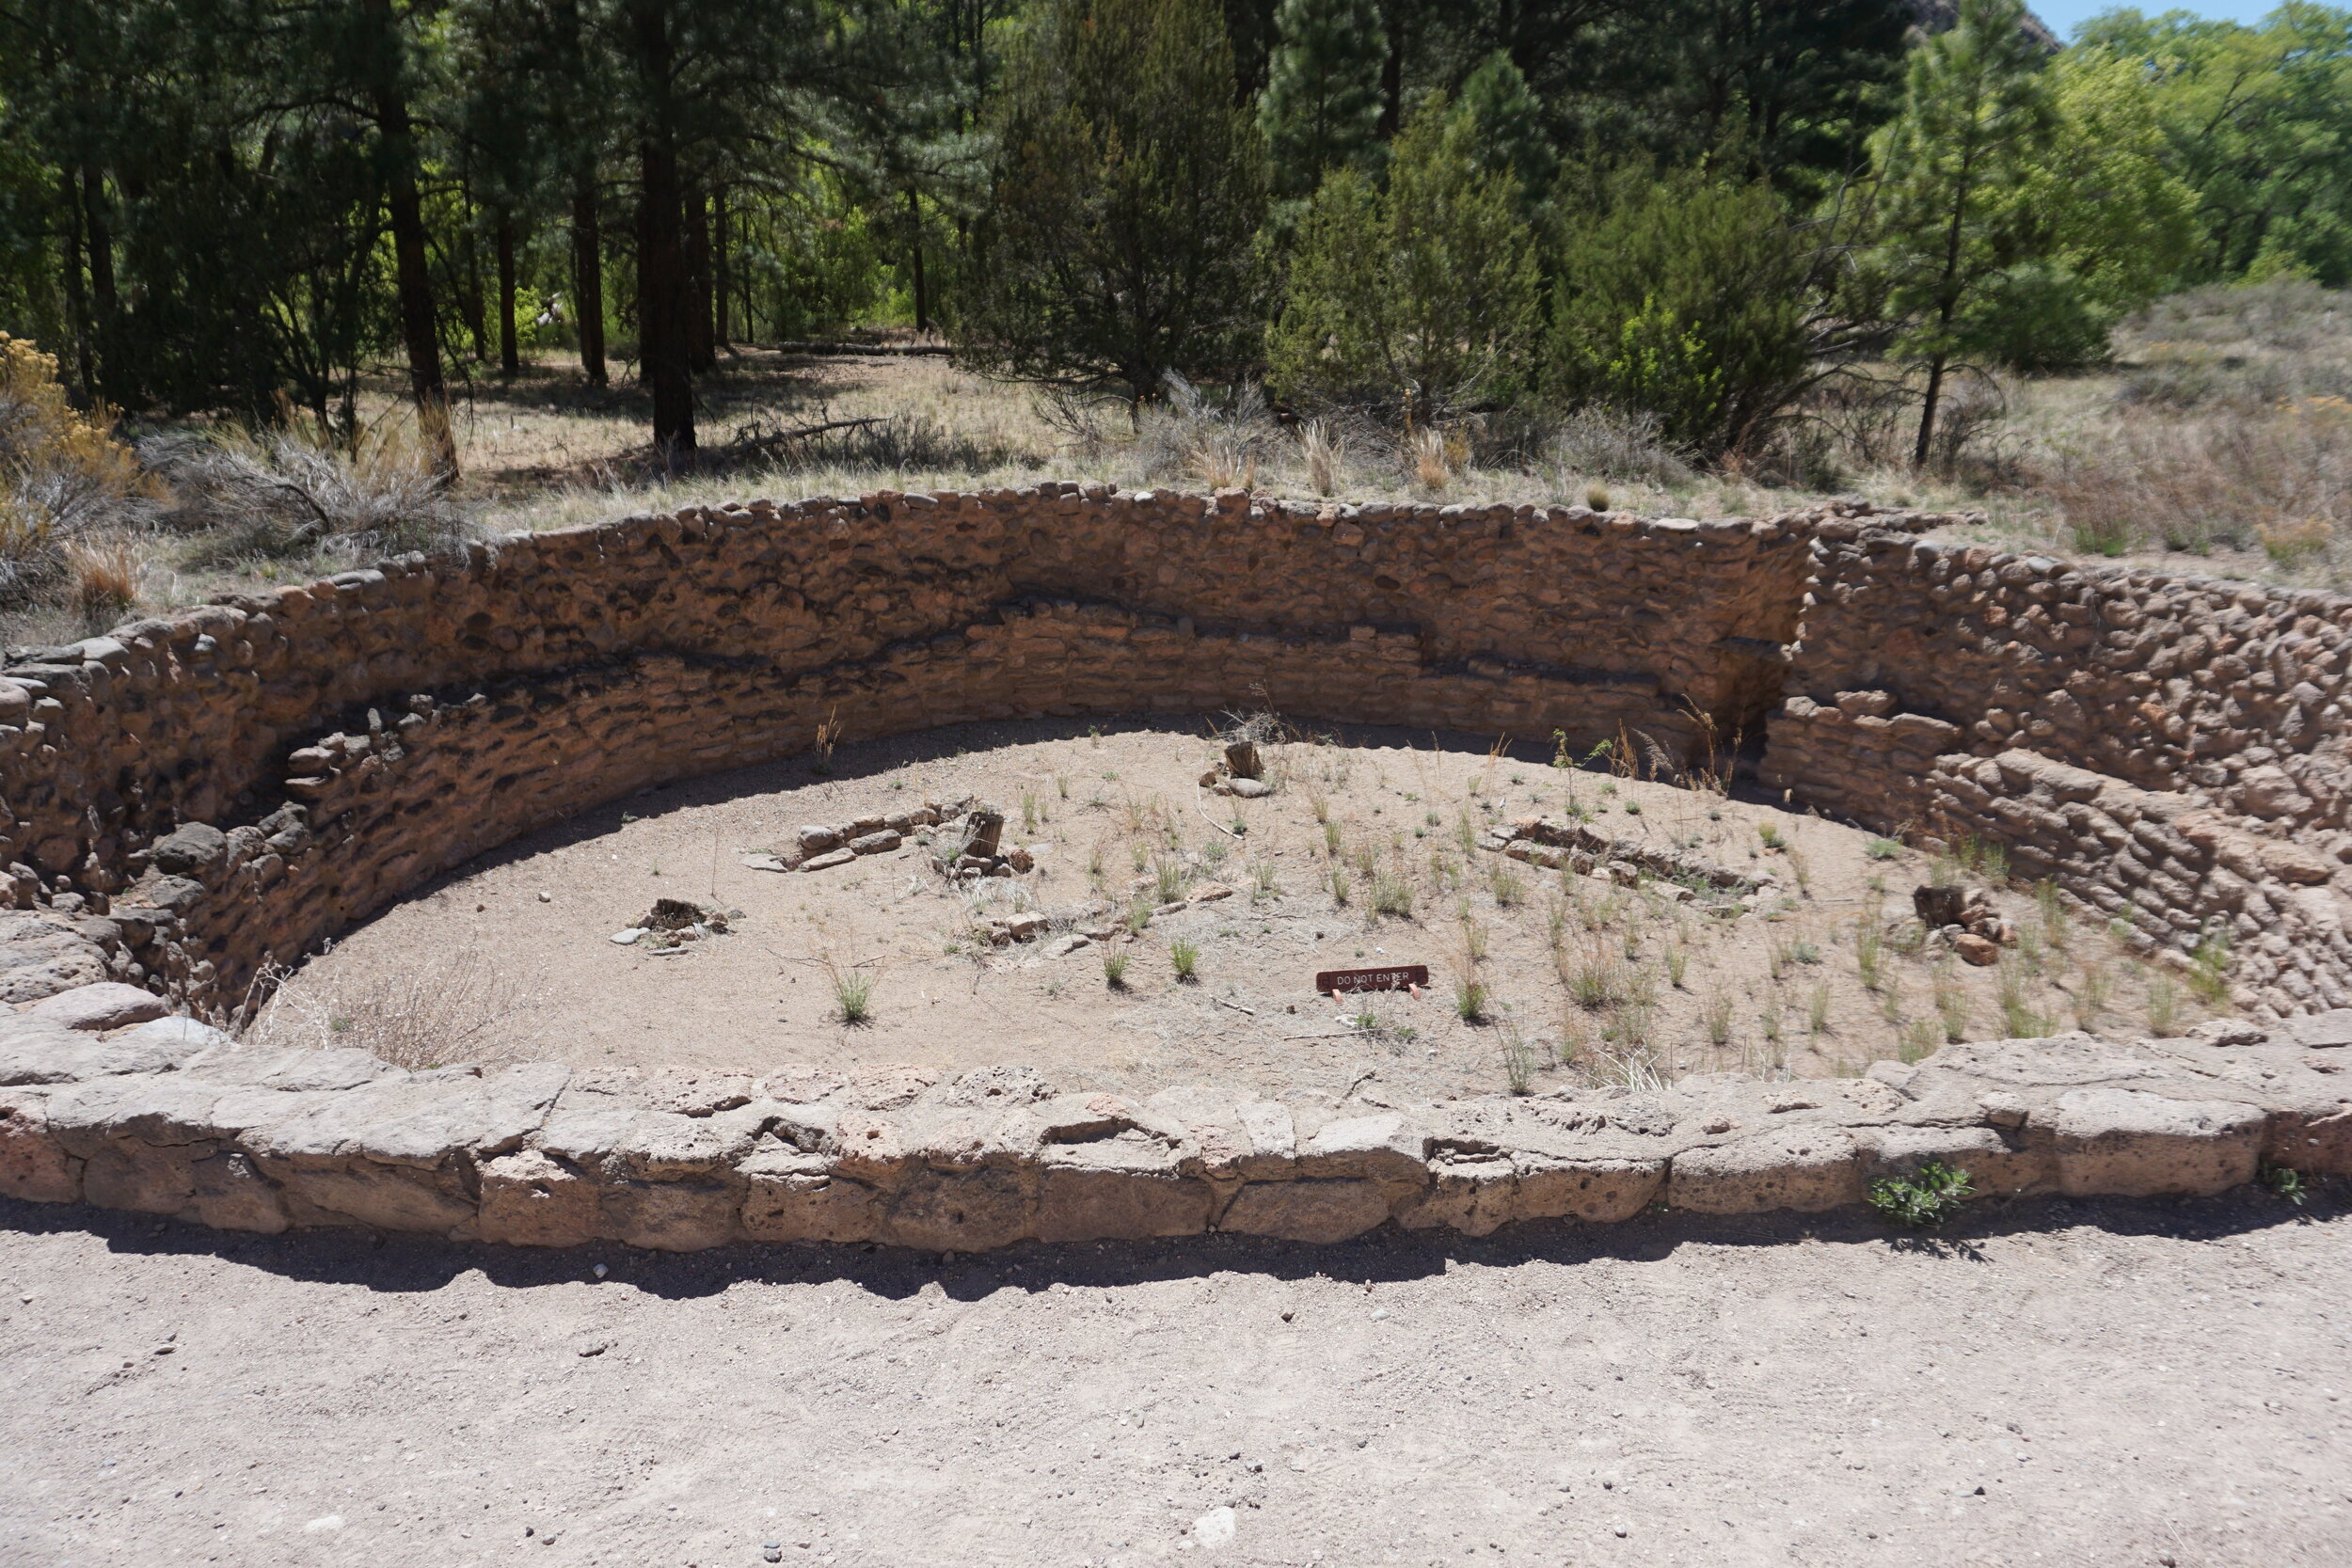 Remains of an open kiva at Bandelier National Monument